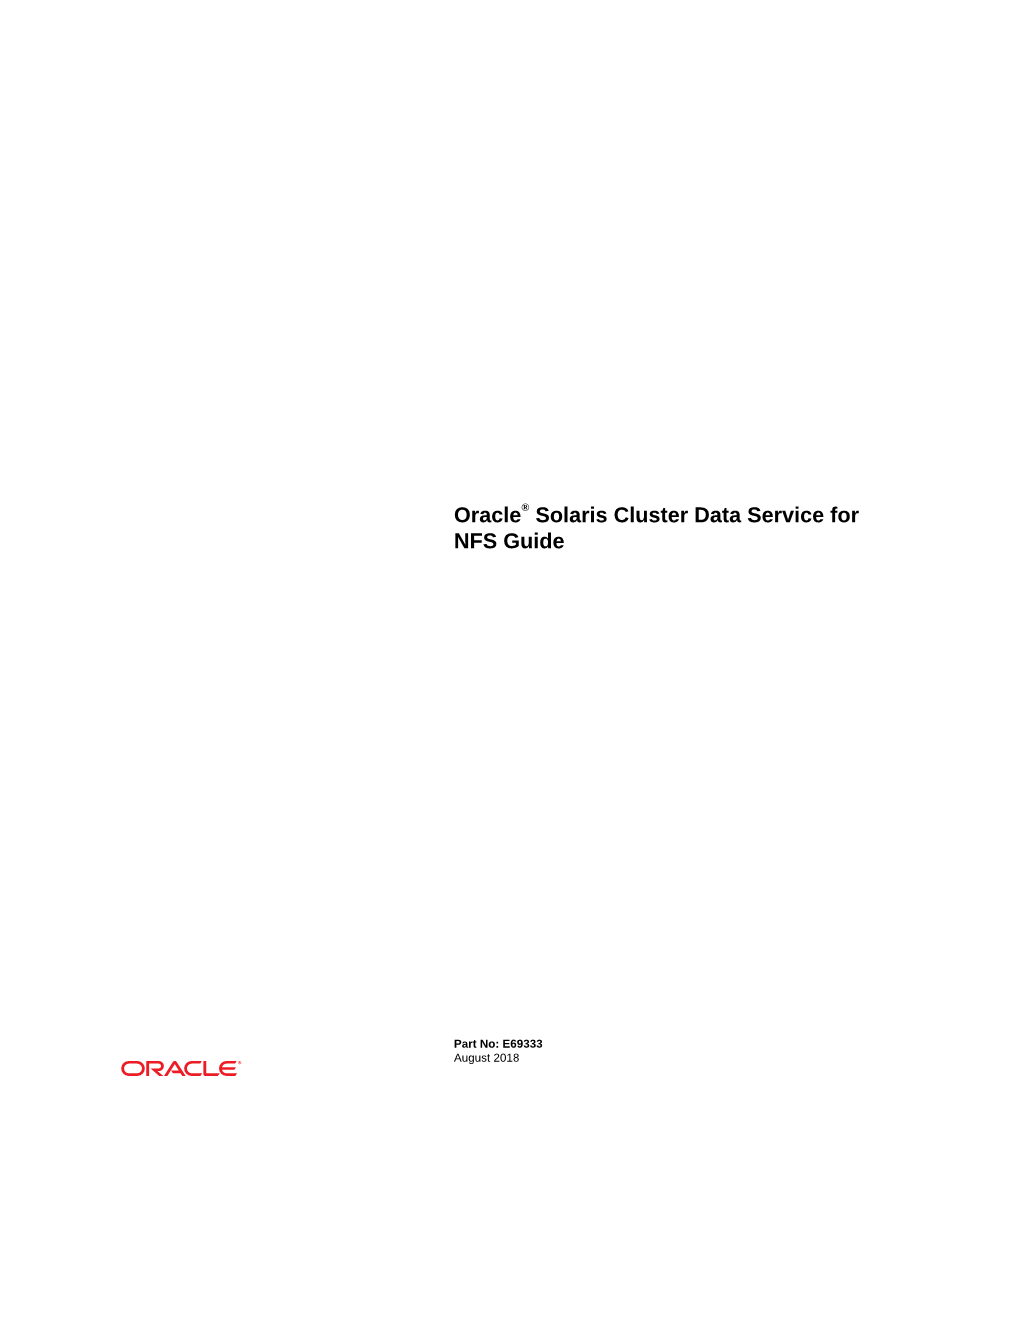 Oracle® Solaris Cluster Data Service for NFS Guide